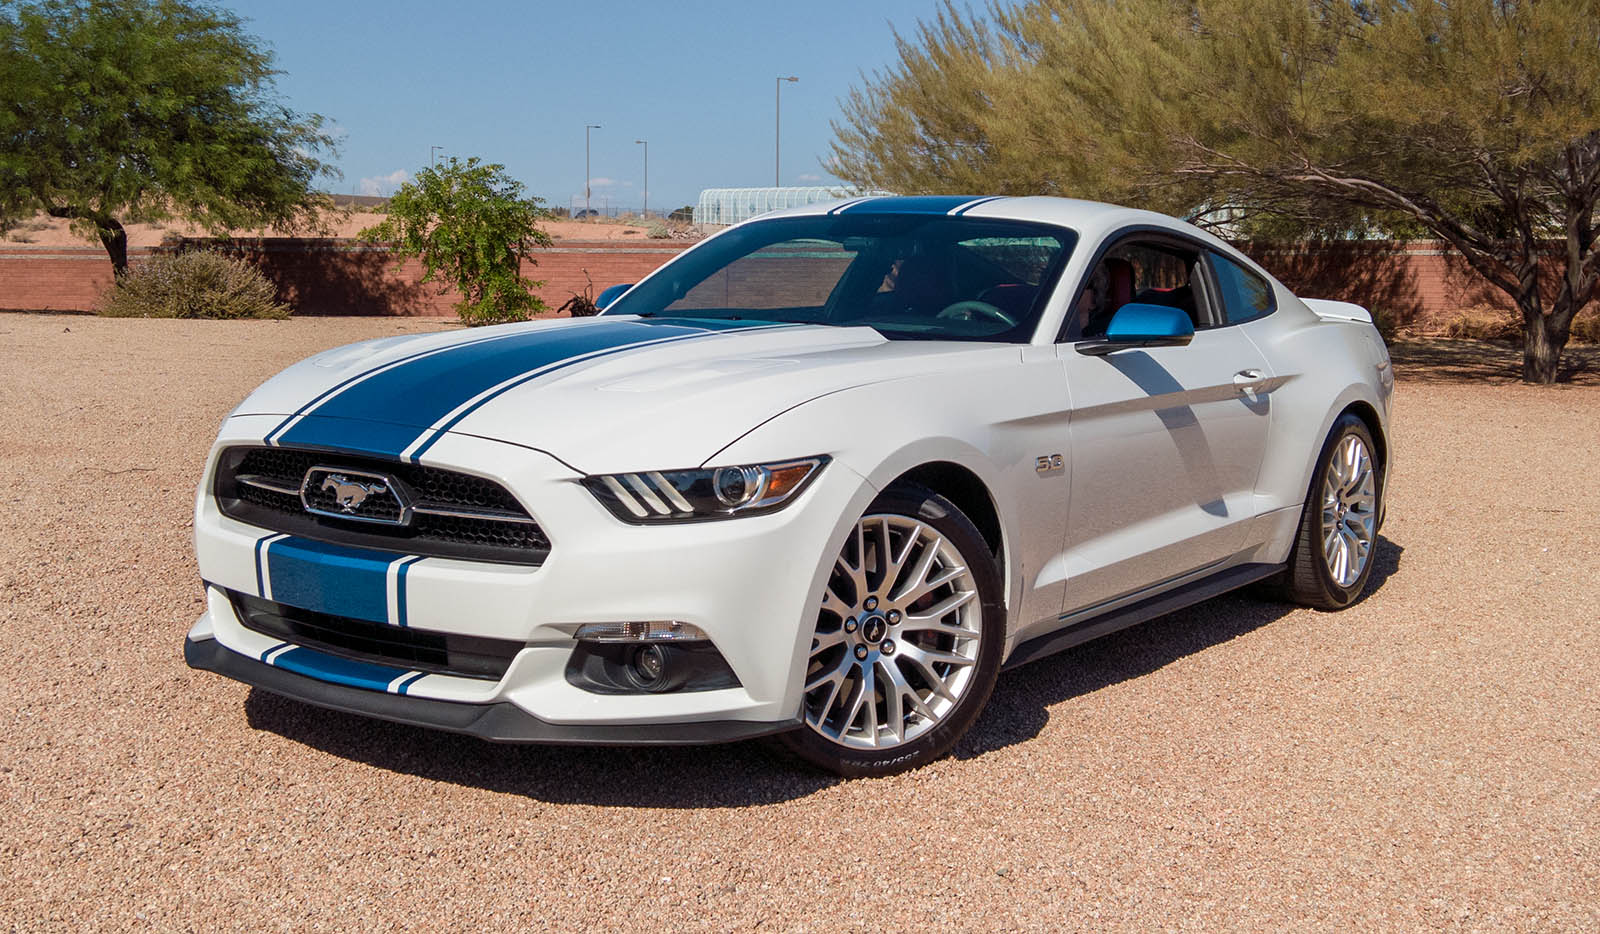 2016 Mustang GT Premium PP with Velocity Blue painted stripes